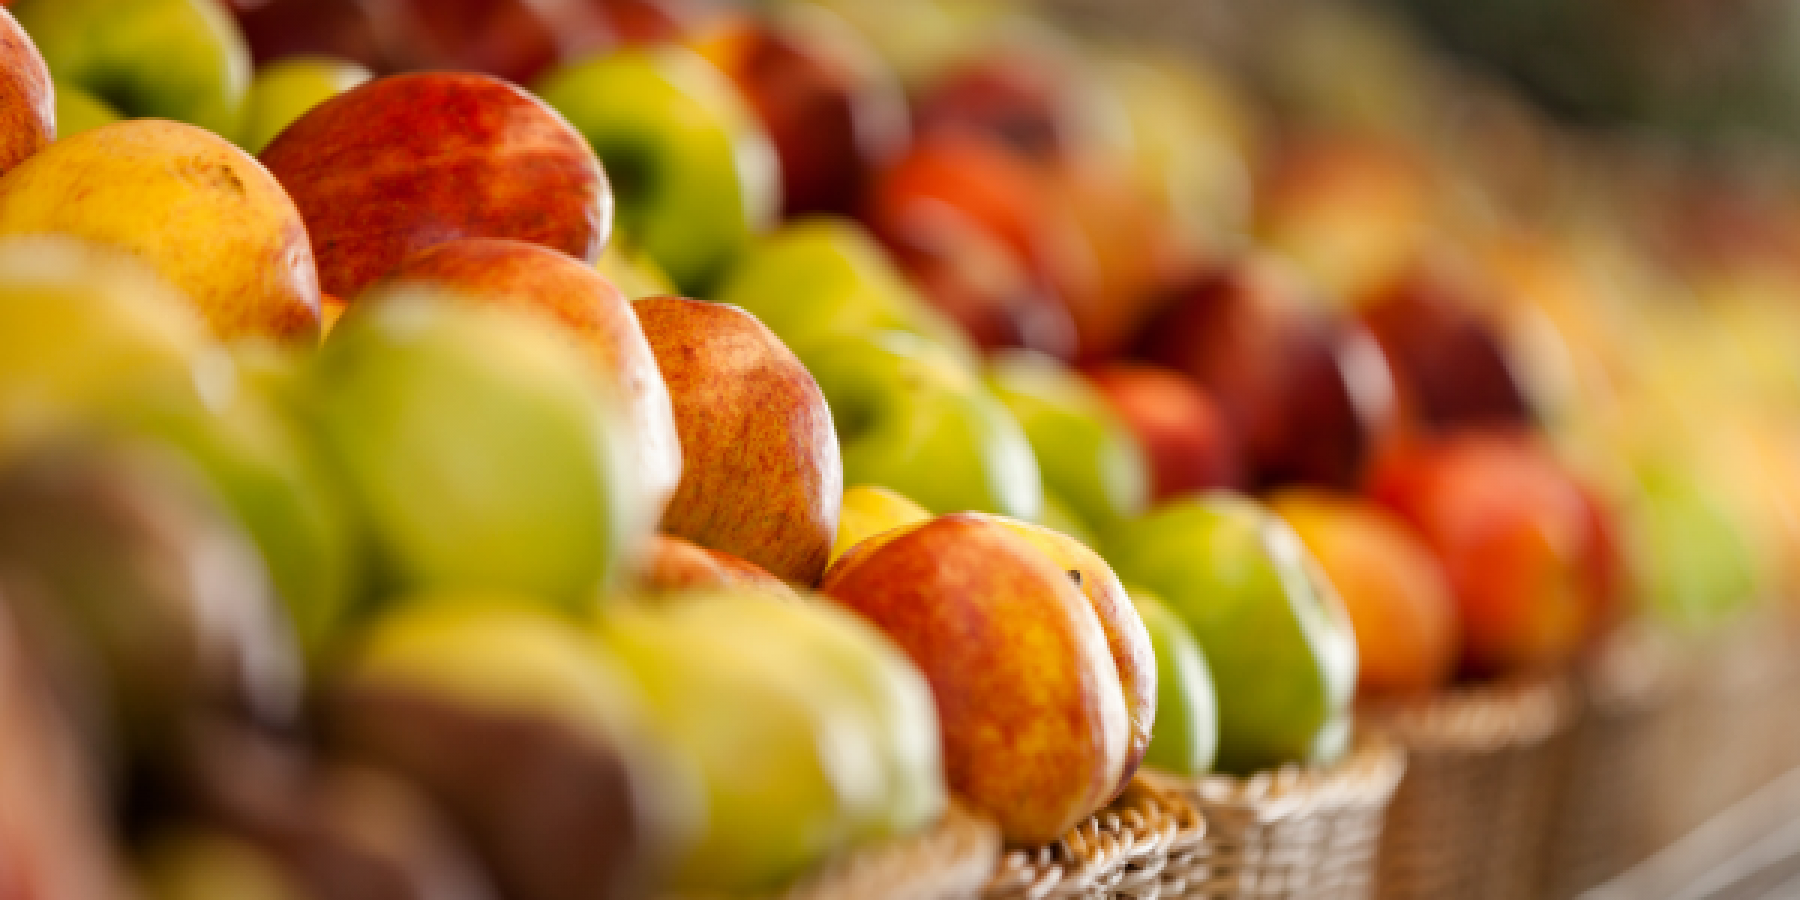 Apples/nutrition.Image by Shutterstock